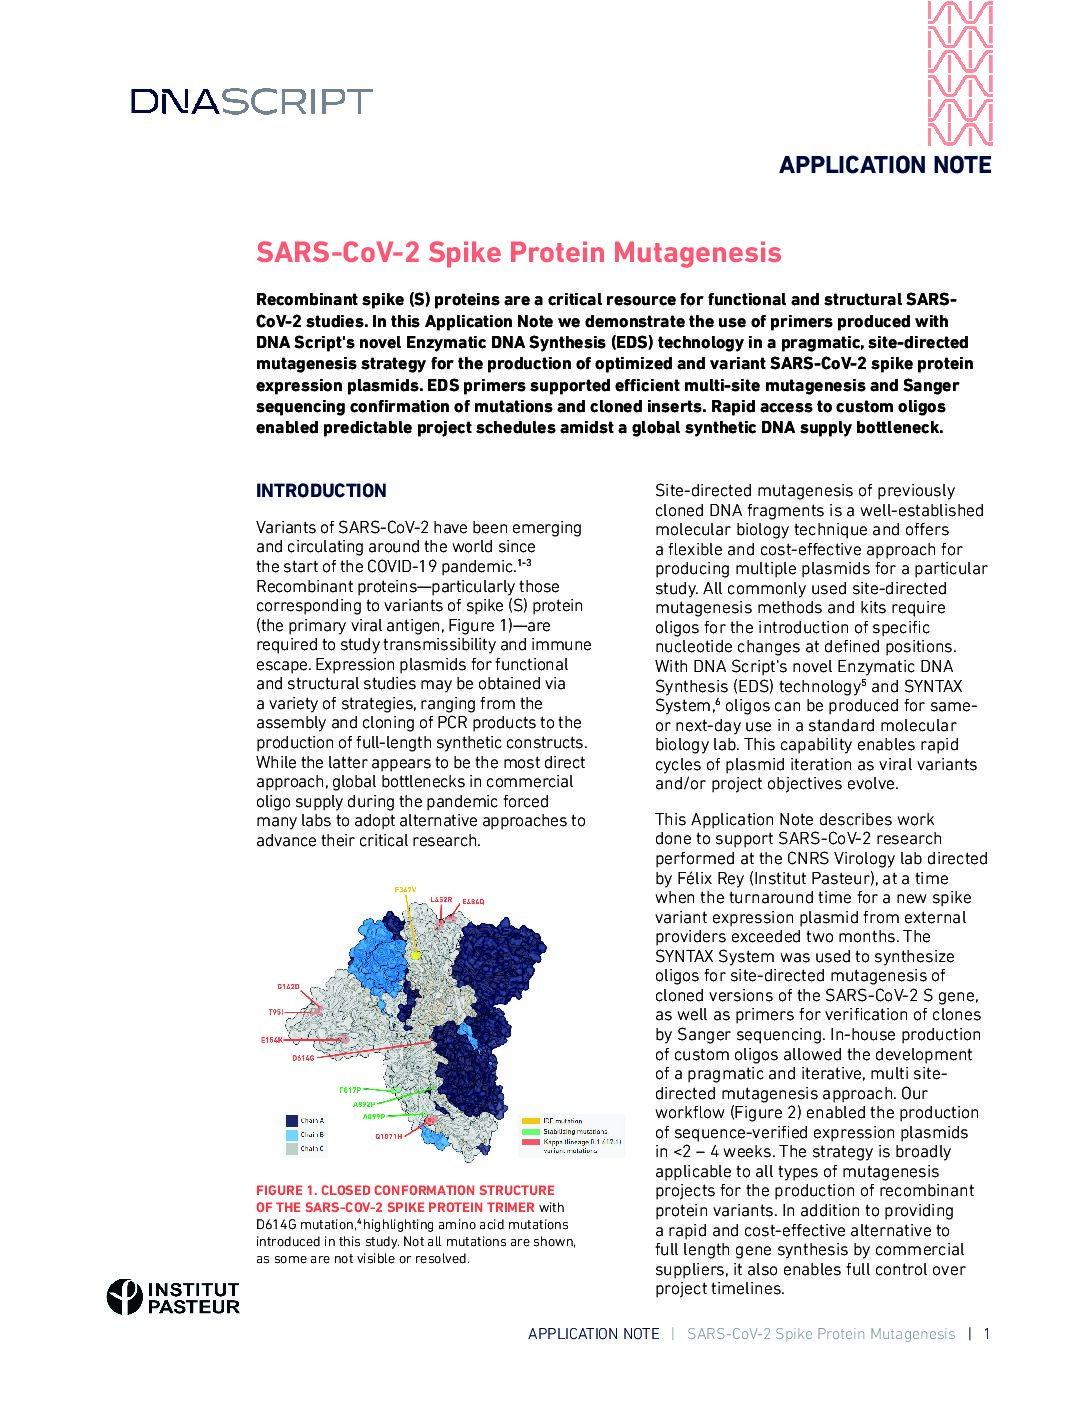 SARS-CoV-2 Spike Protein Mutagenesis Application Note